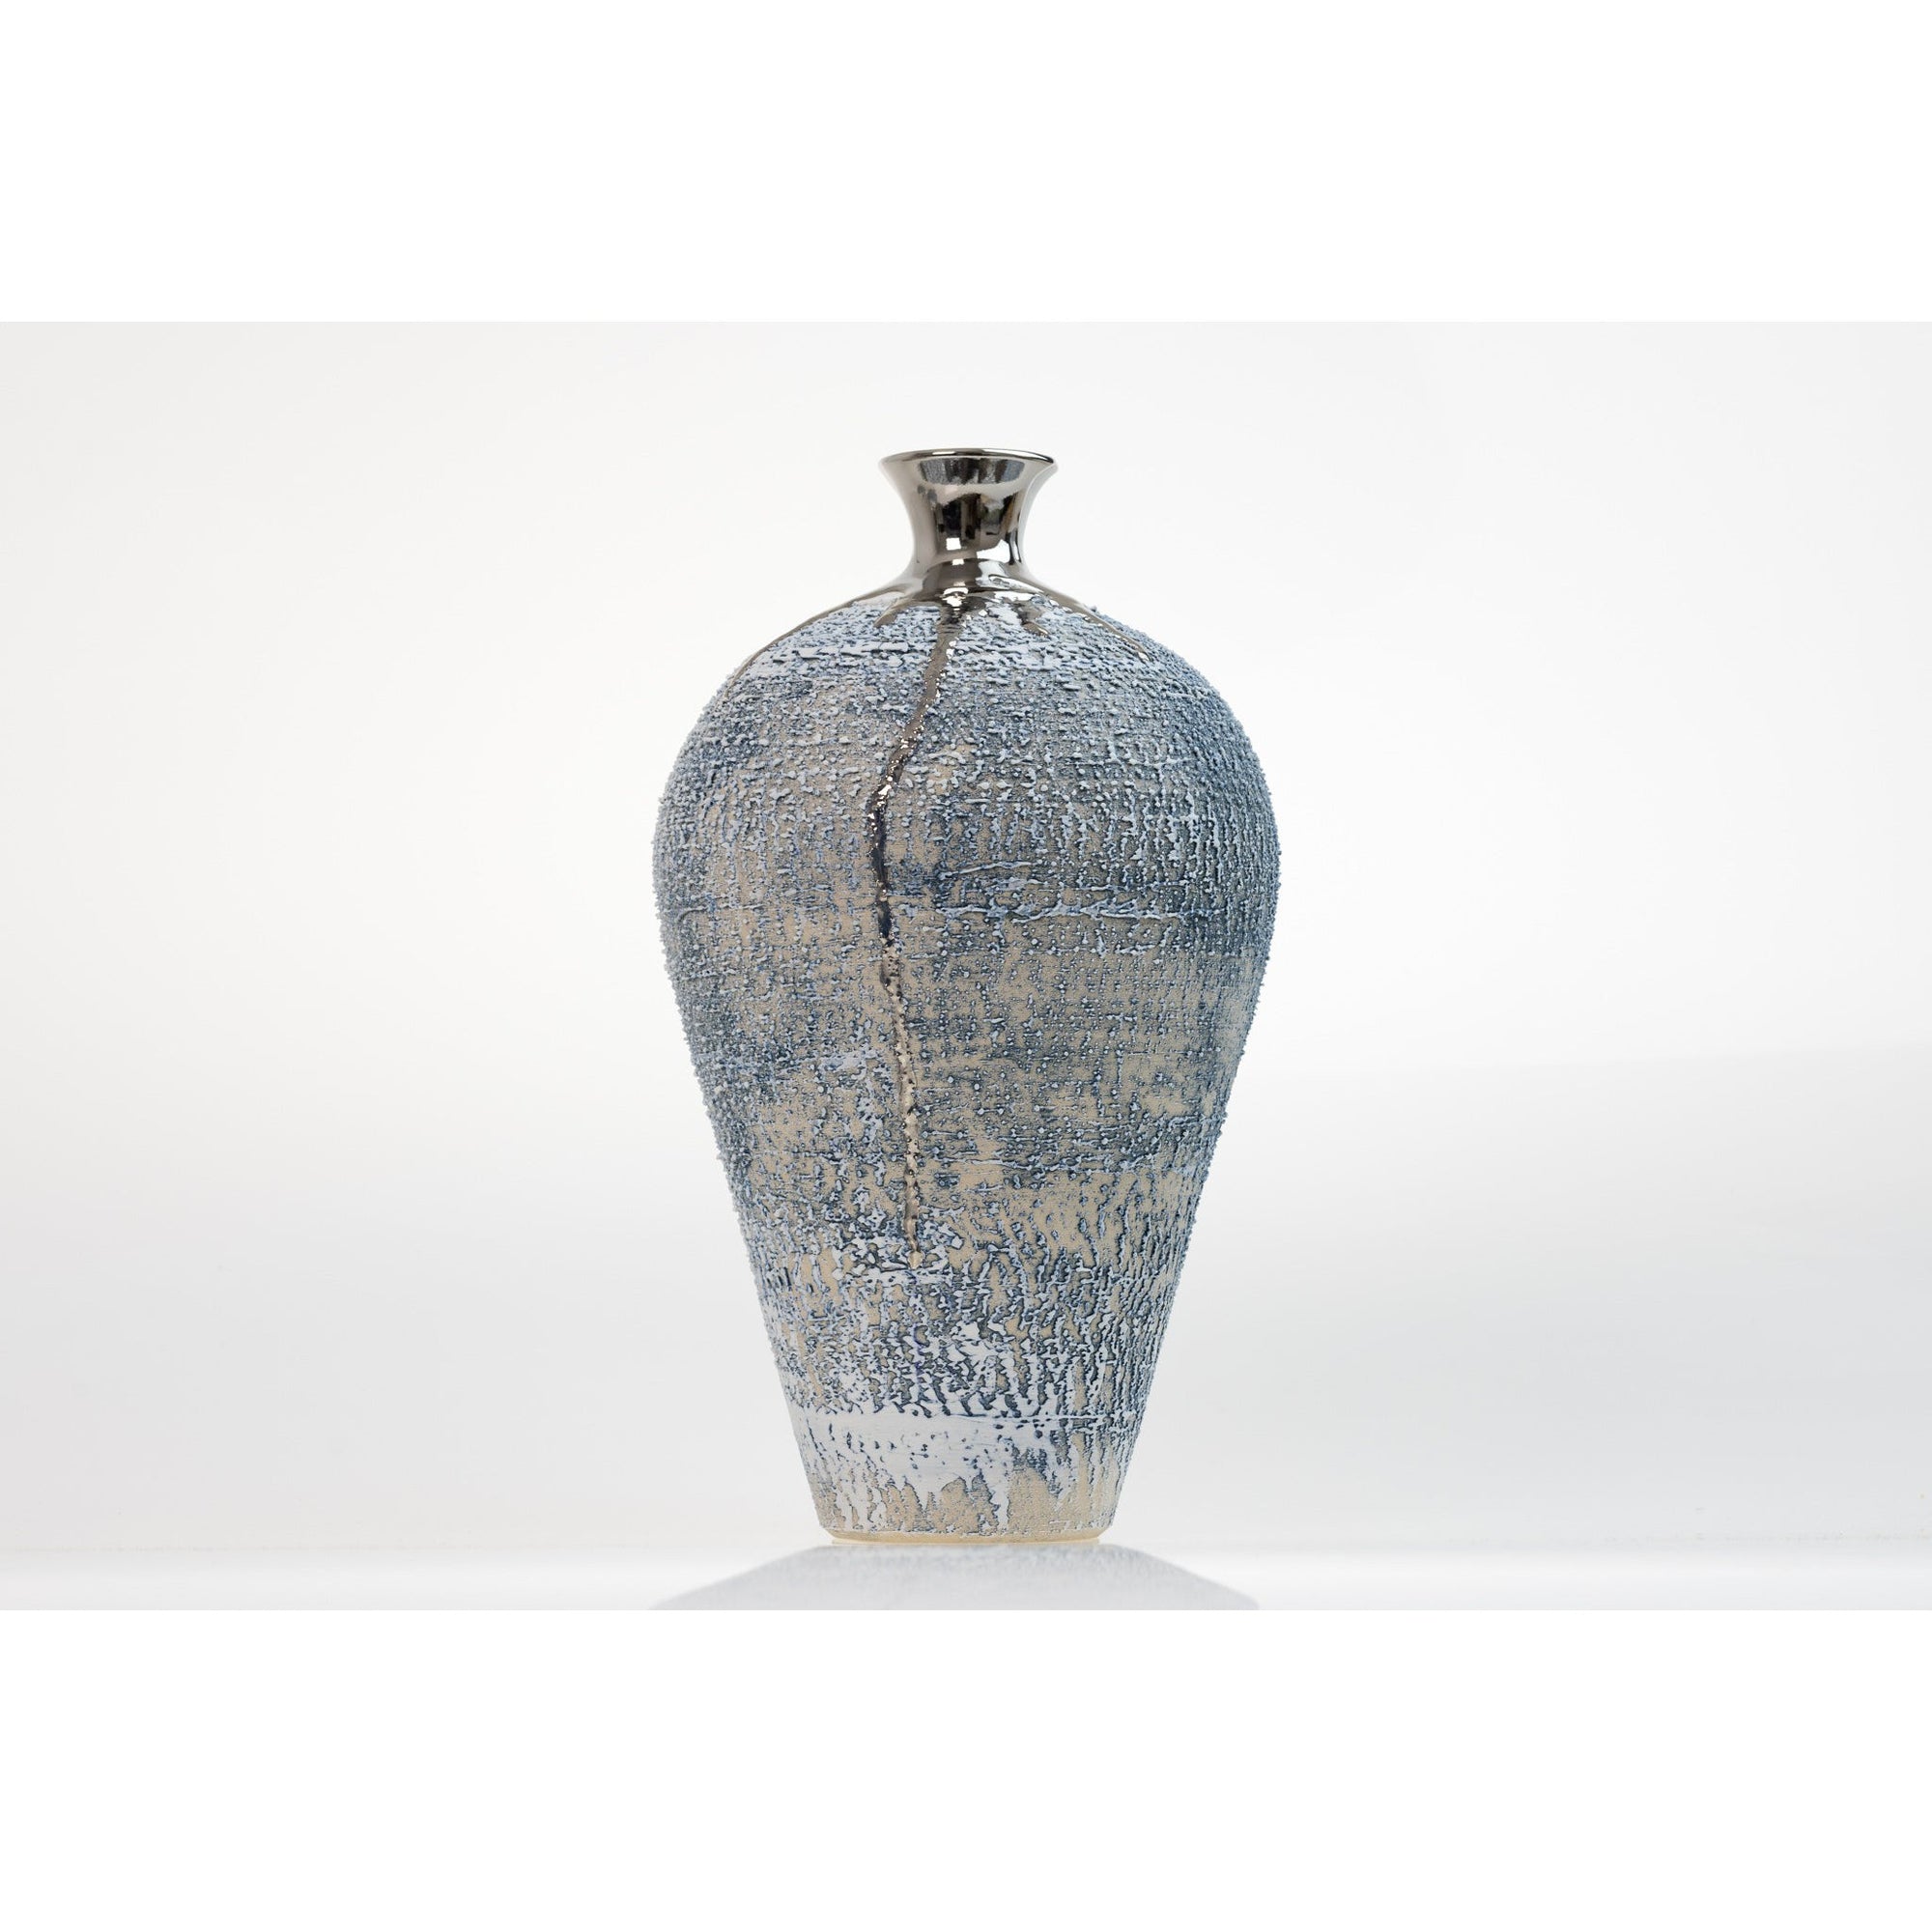 PGX18 Zephyr Textured Vase with Platinum Lustre by Alex McCarthy, available at Padstow Gallery, Cornwall